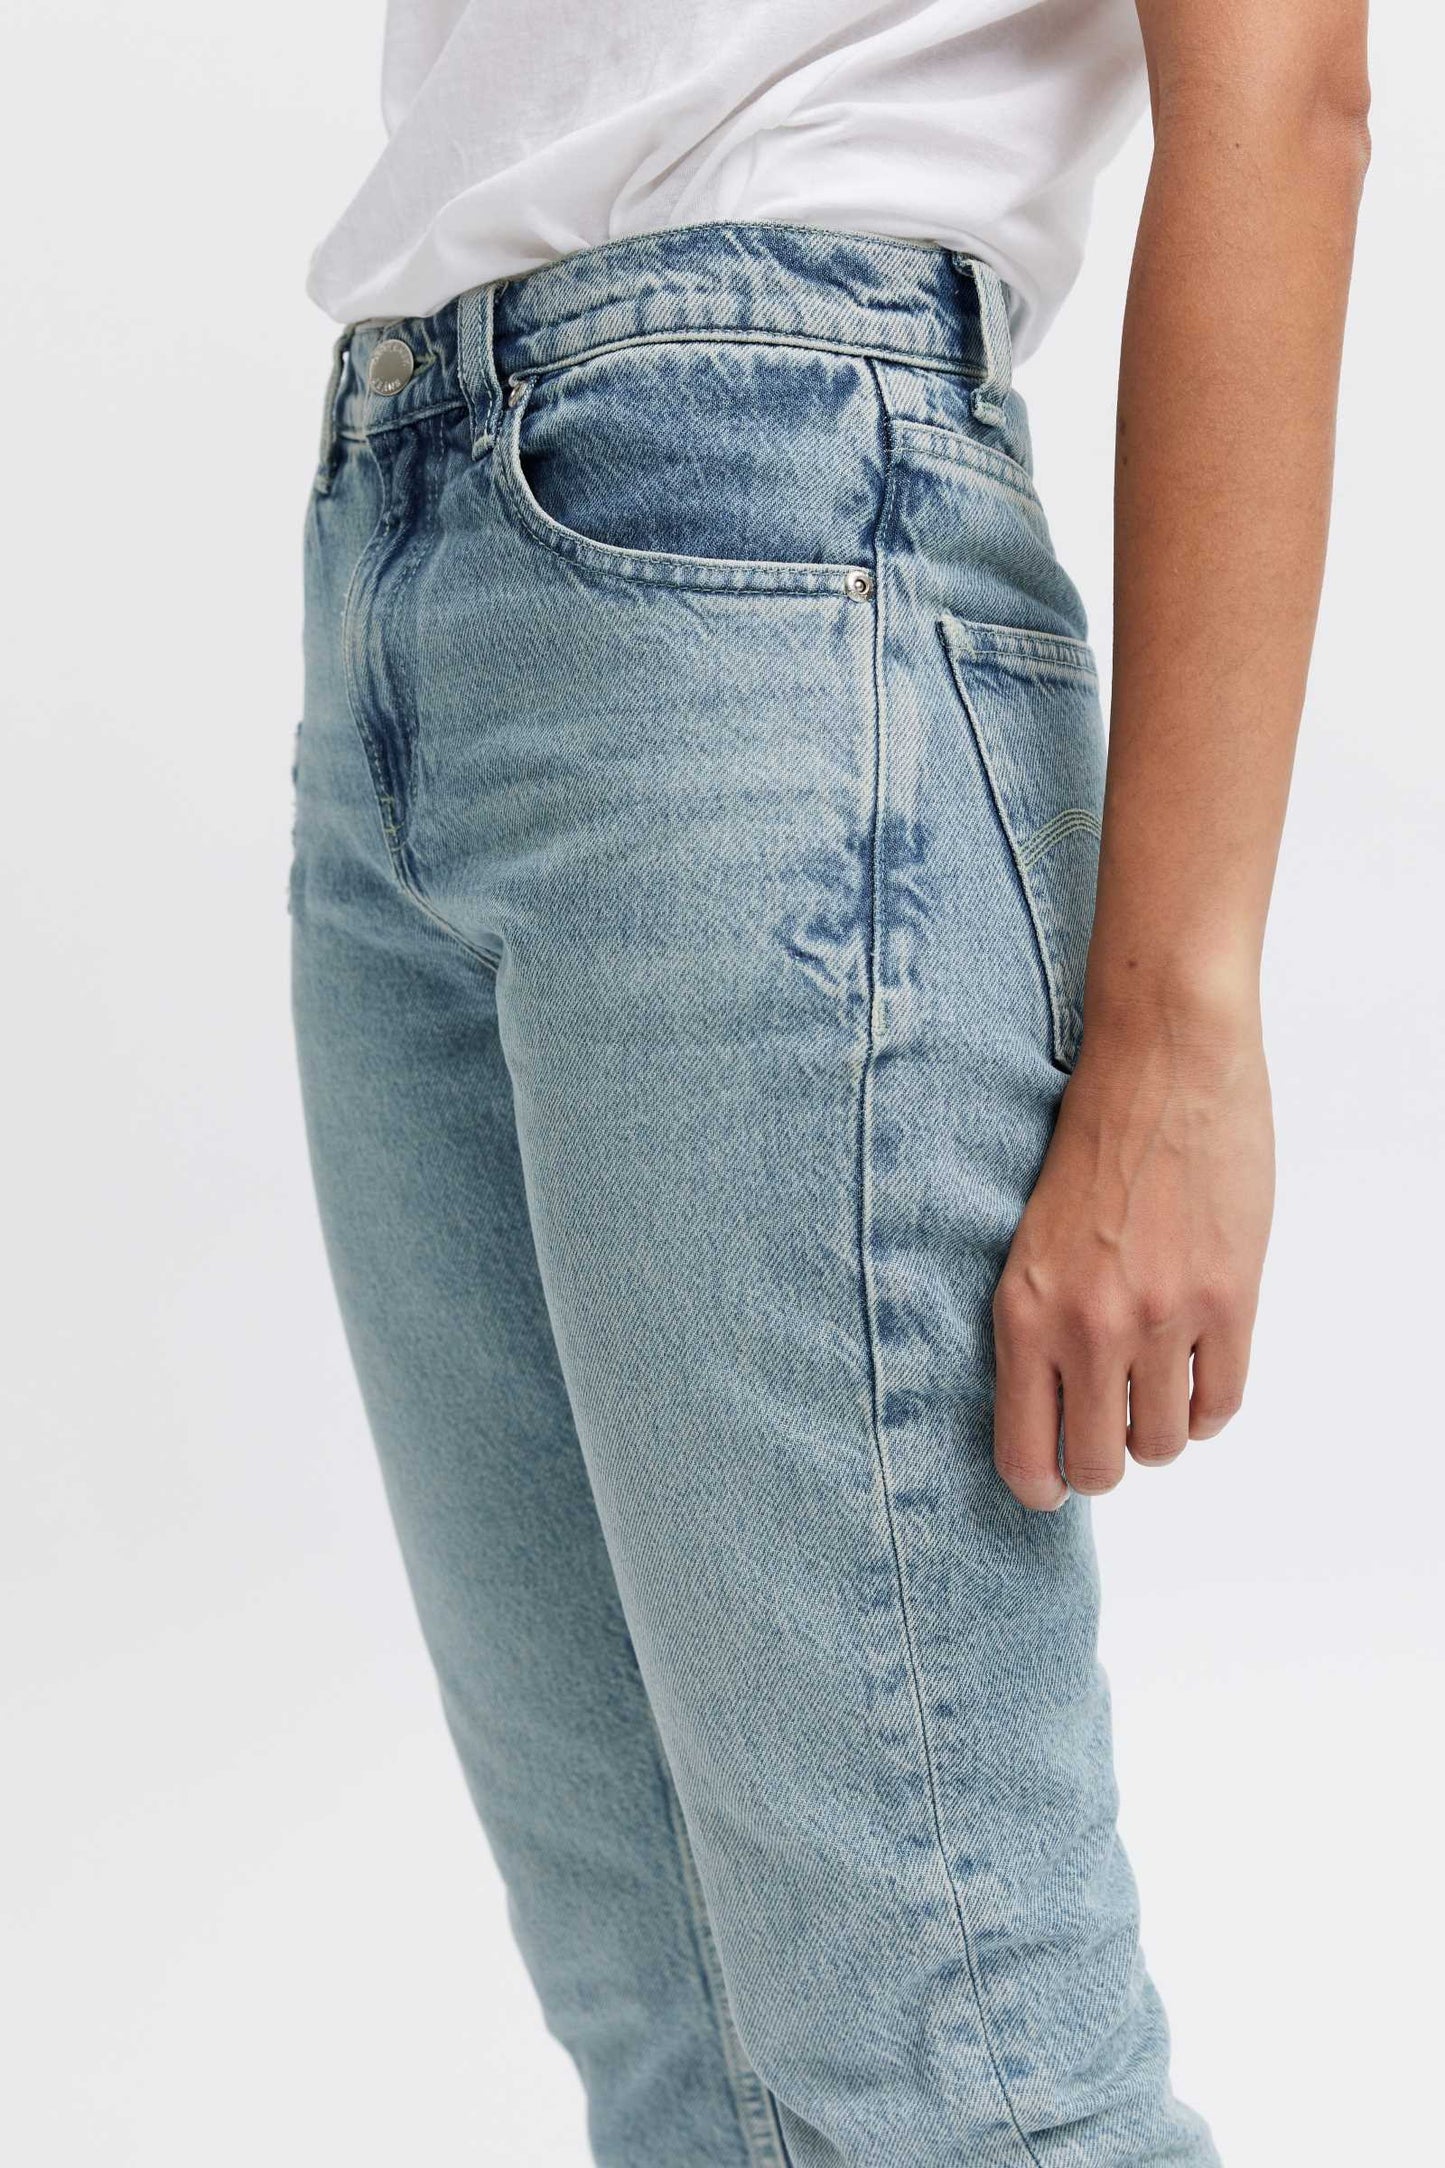 Sustainable denim for Women - Cropped leg jeans in bright wash